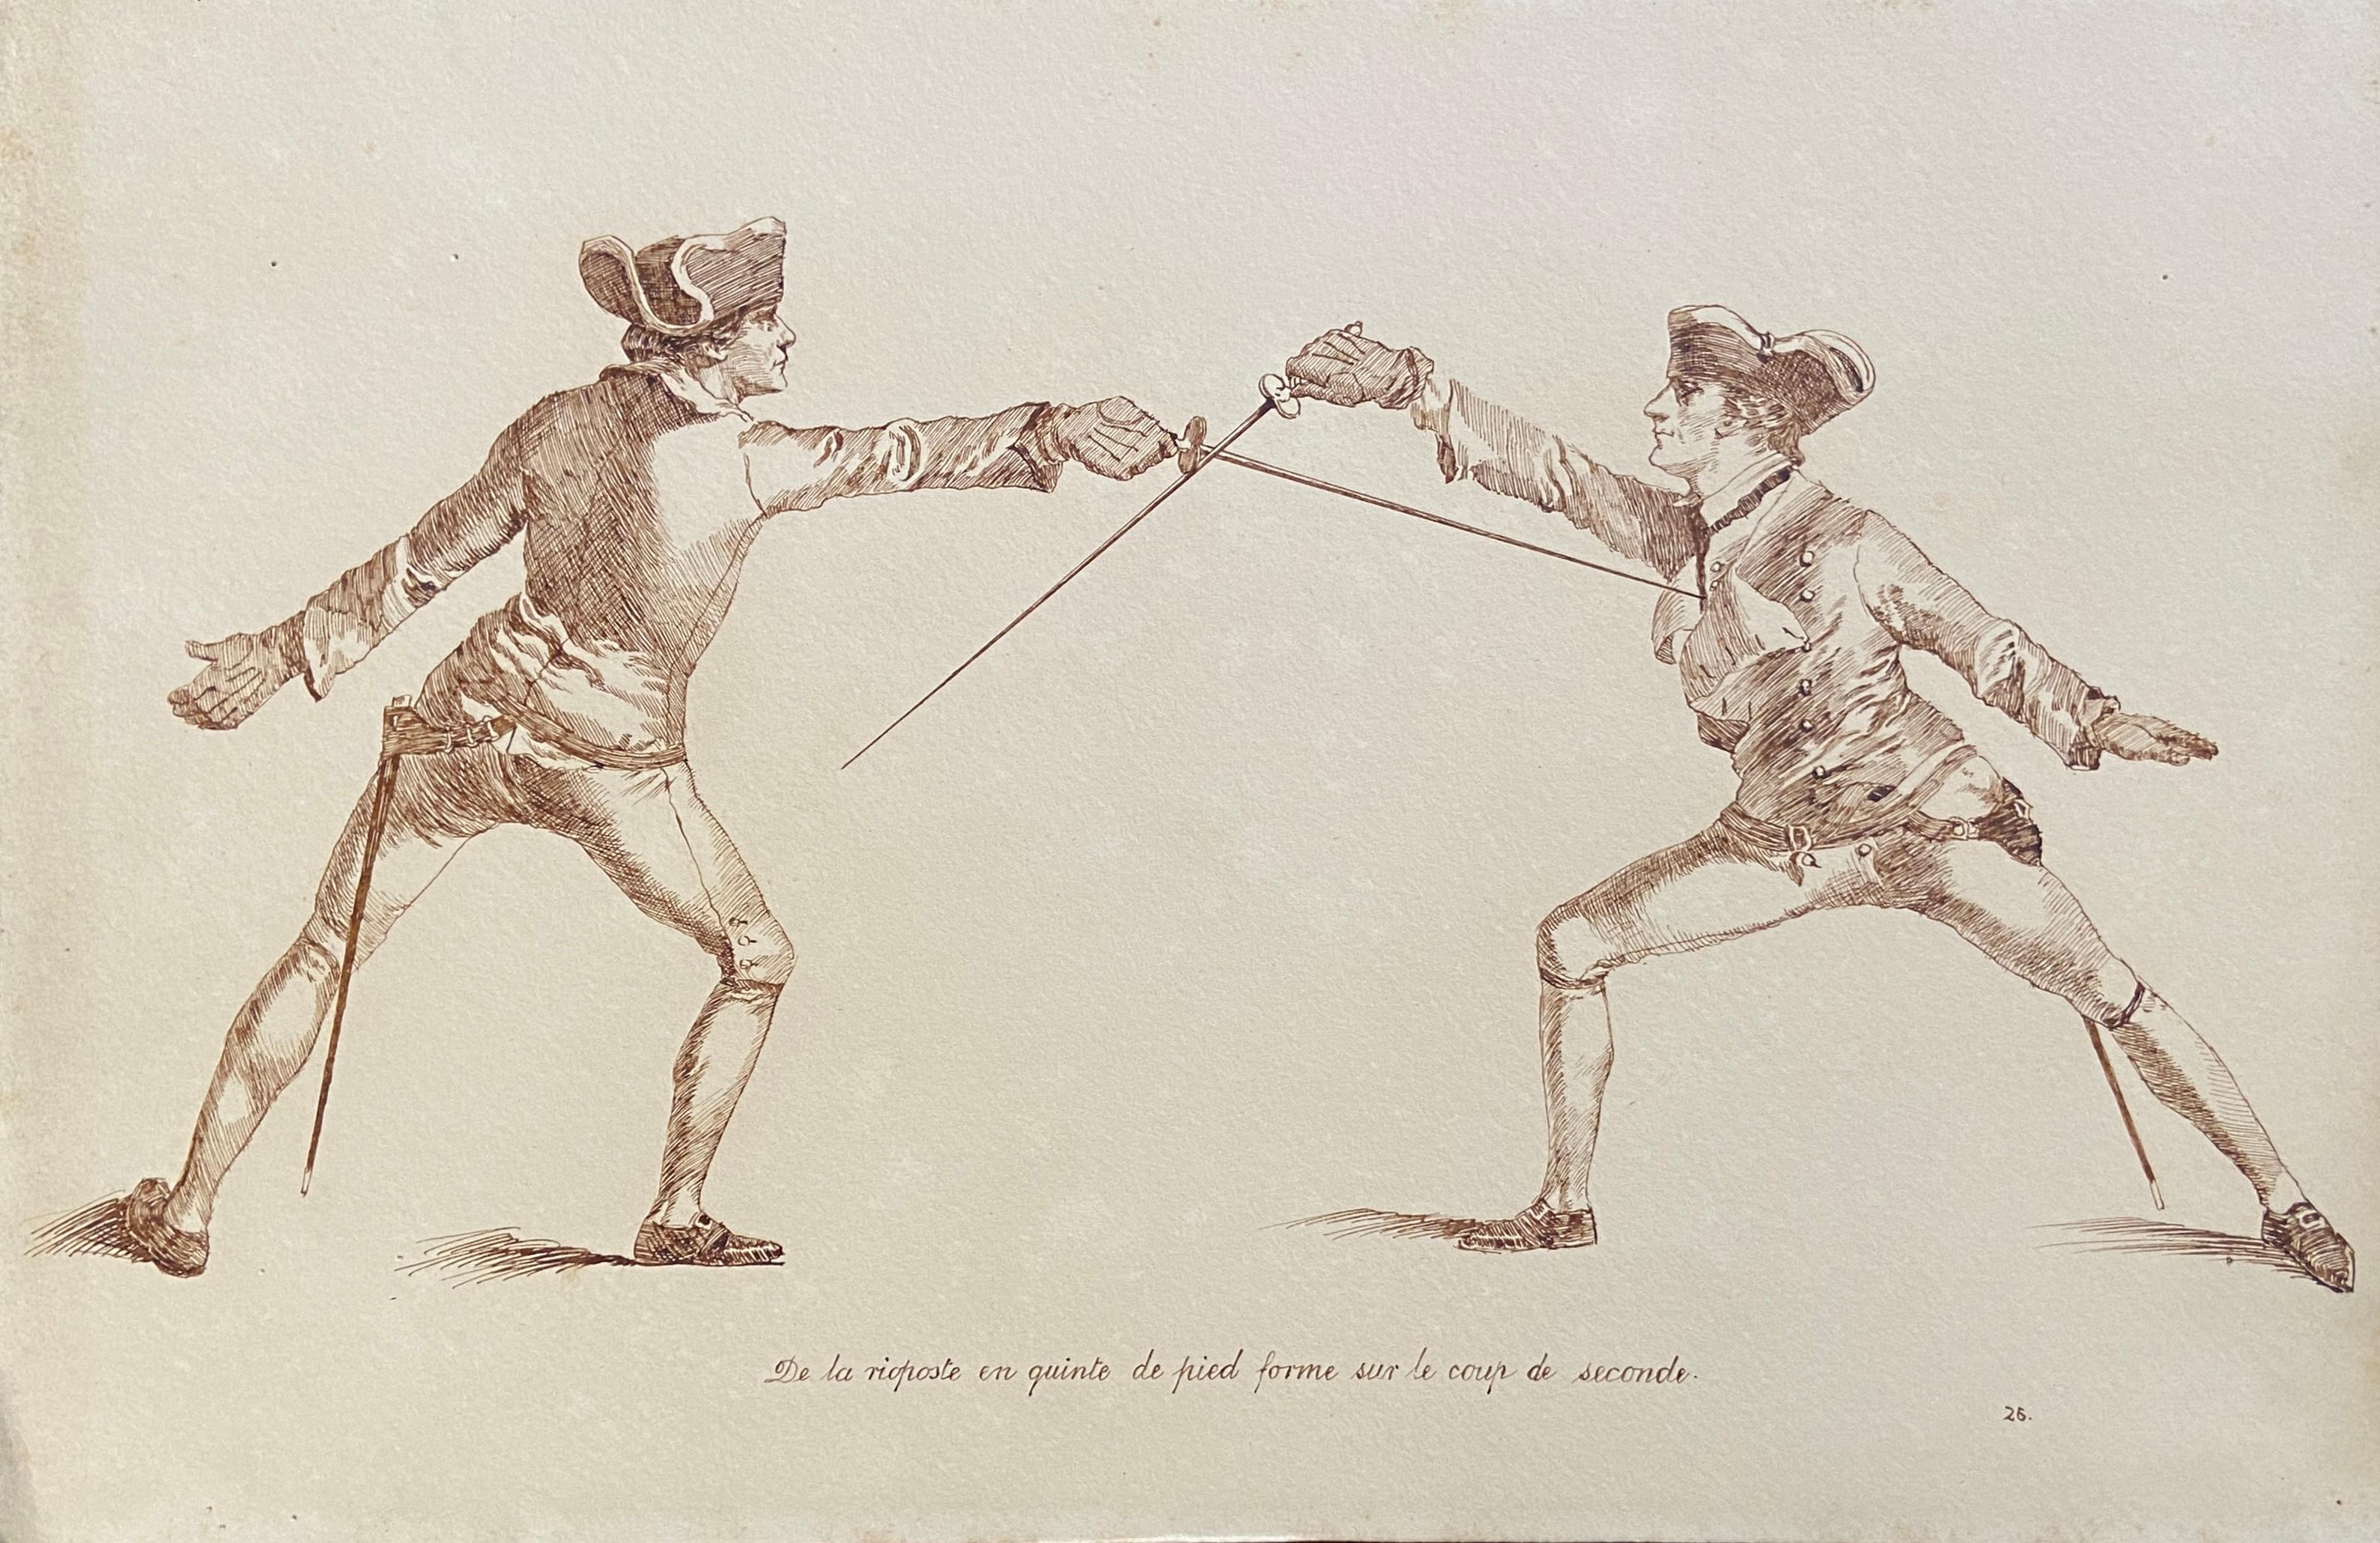 Pen and Ink, titled lower centre
Image size: 11 x 18 inches (28 x 46cm). 
Priced as Individuals
Please note that each image size varies slightly

These pen and ink studies show two gentleman fencers in various fighting positions. These have been